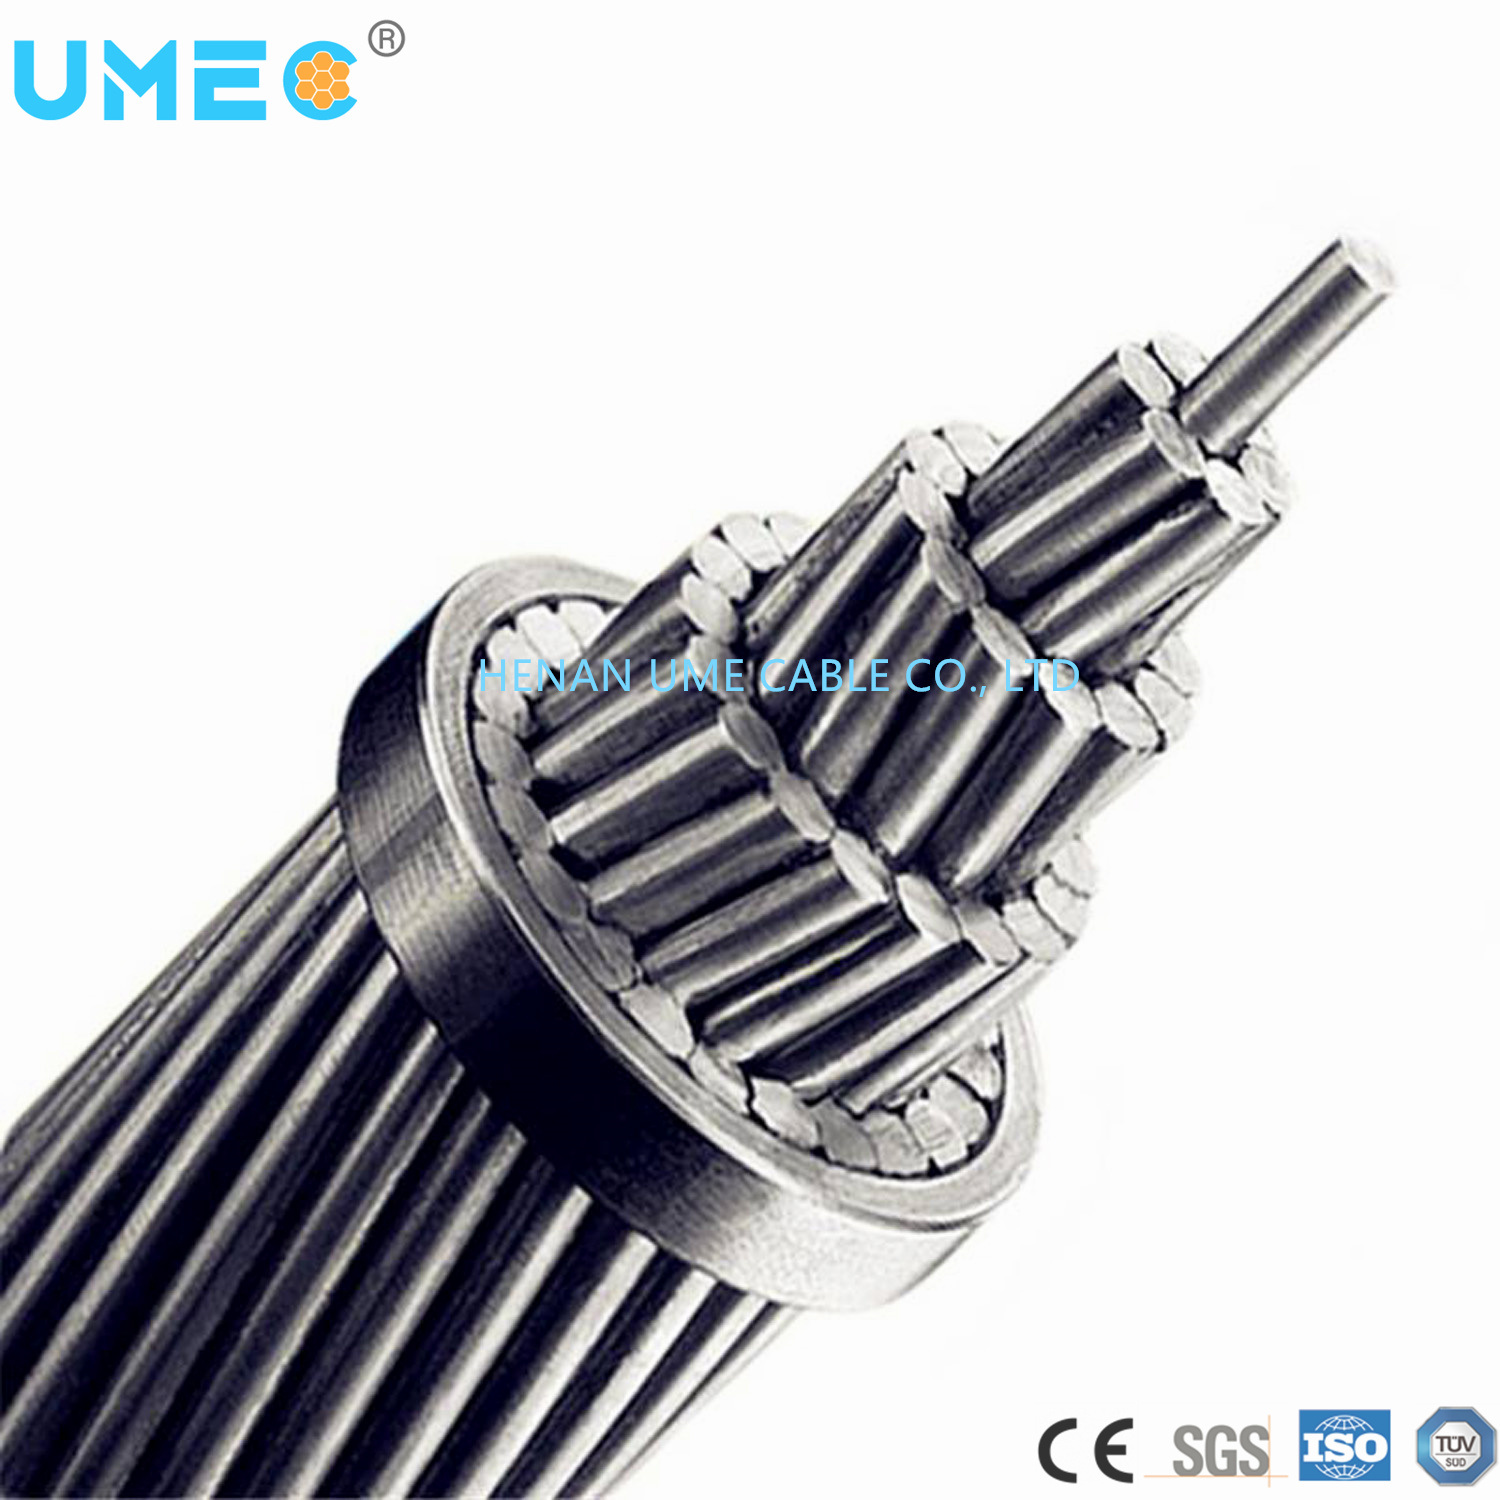 Bare Conductor Aluminum Conductor Alloy Reinforced Acar